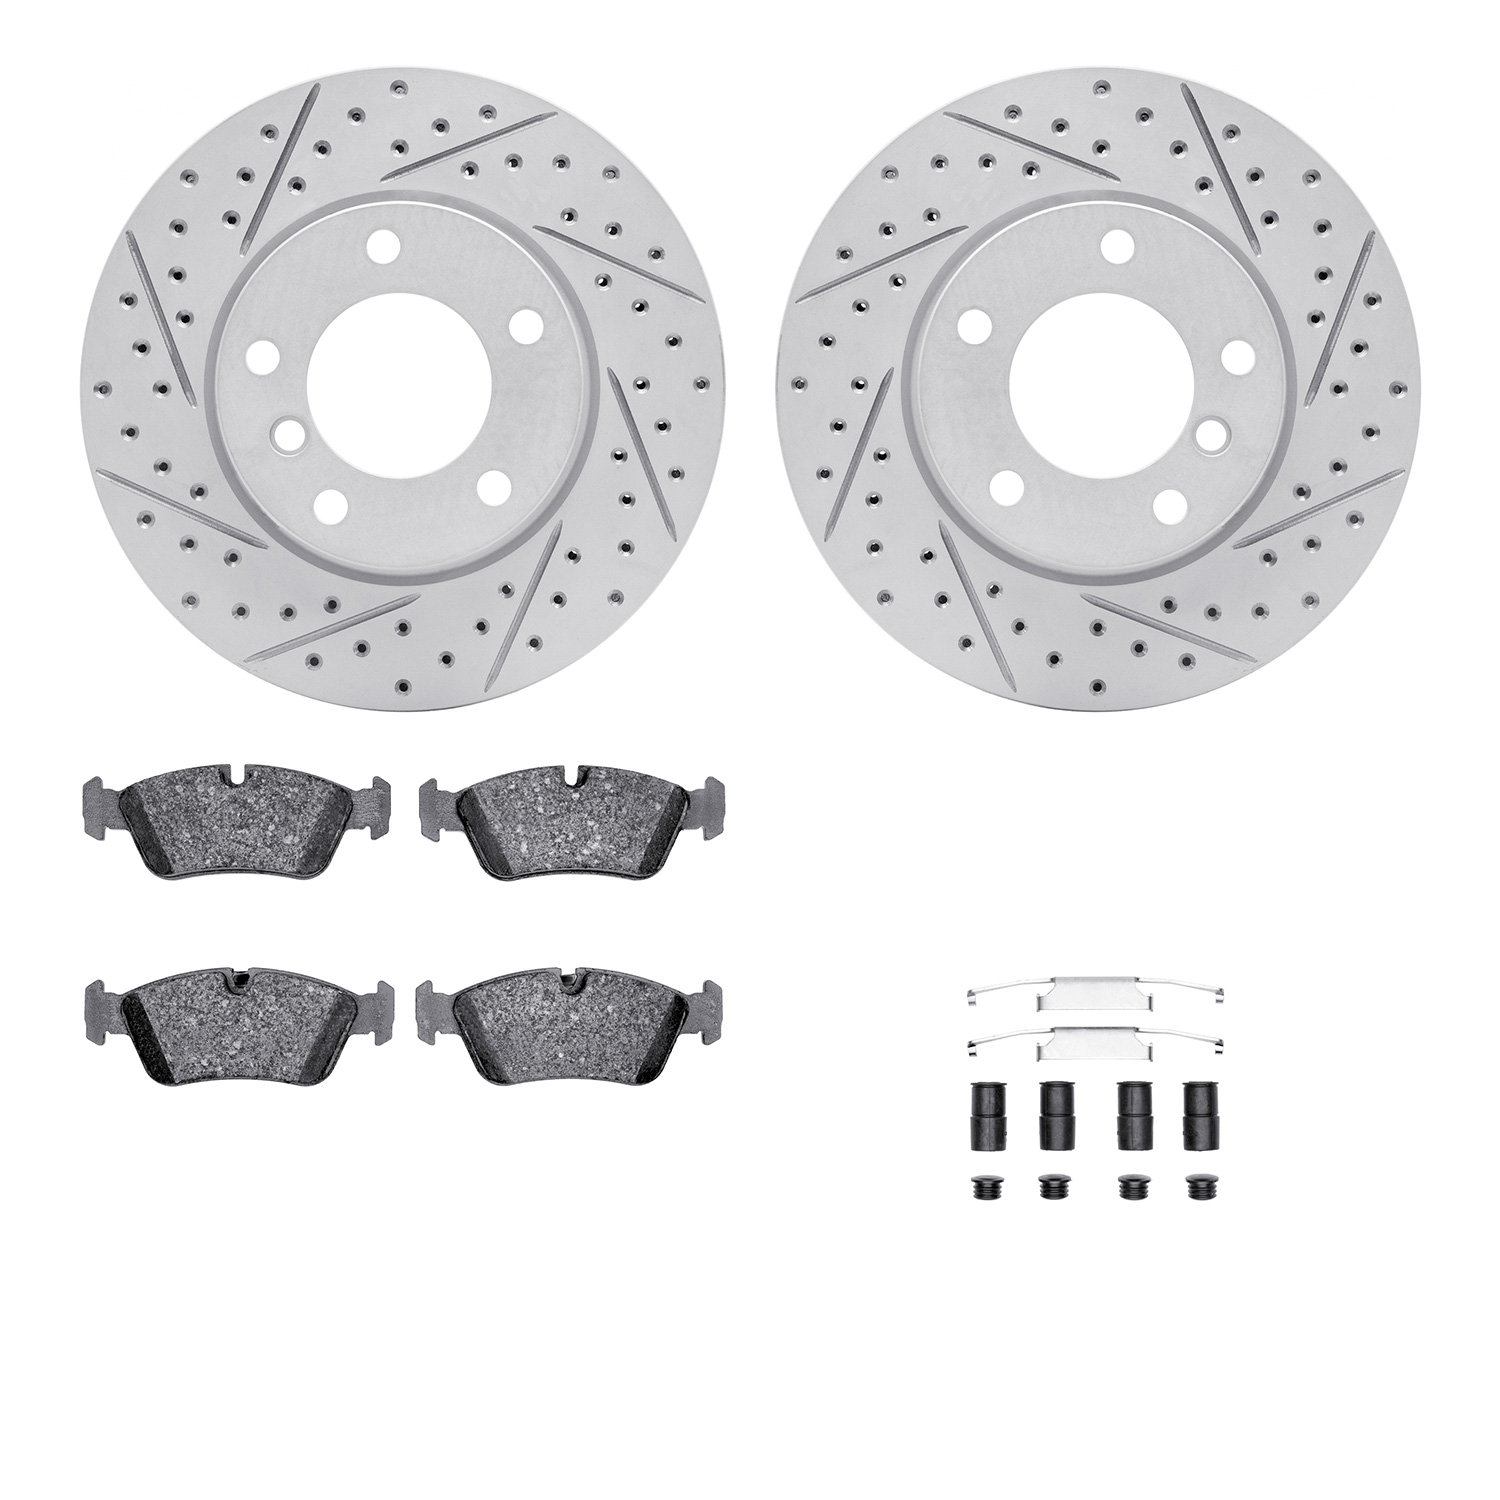 2512-31007 Geoperformance Drilled/Slotted Rotors w/5000 Advanced Brake Pads Kit & Hardware, 1991-1998 BMW, Position: Front